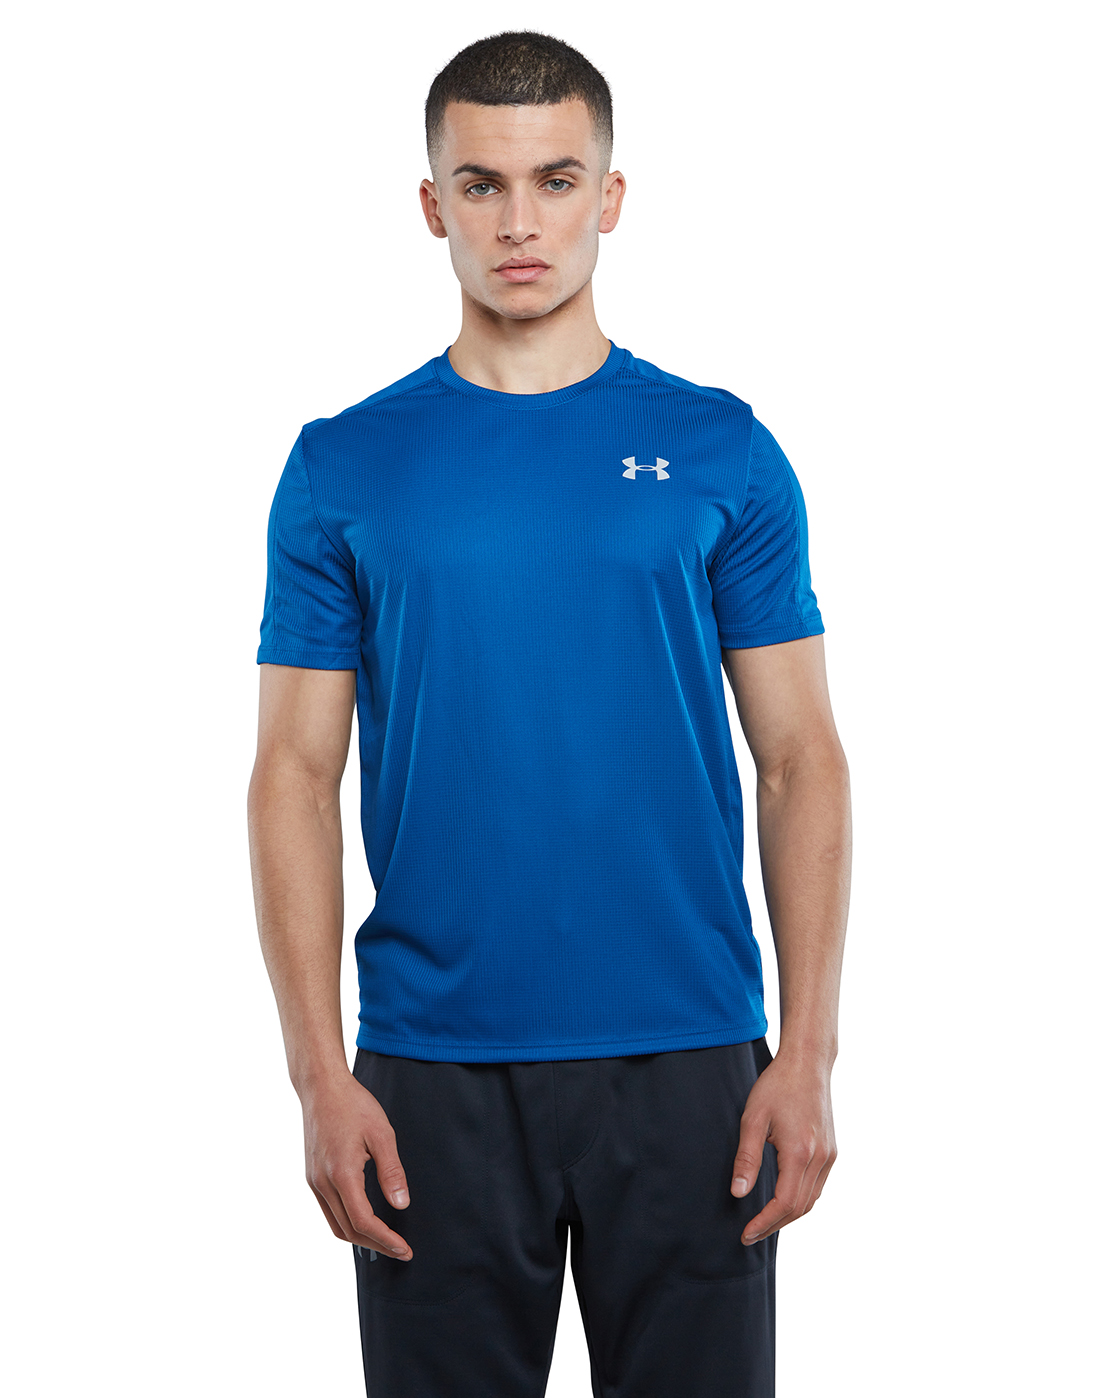 Under Armour Mens Speed Stride T-Shirt - Blue | Life Style Sports IE